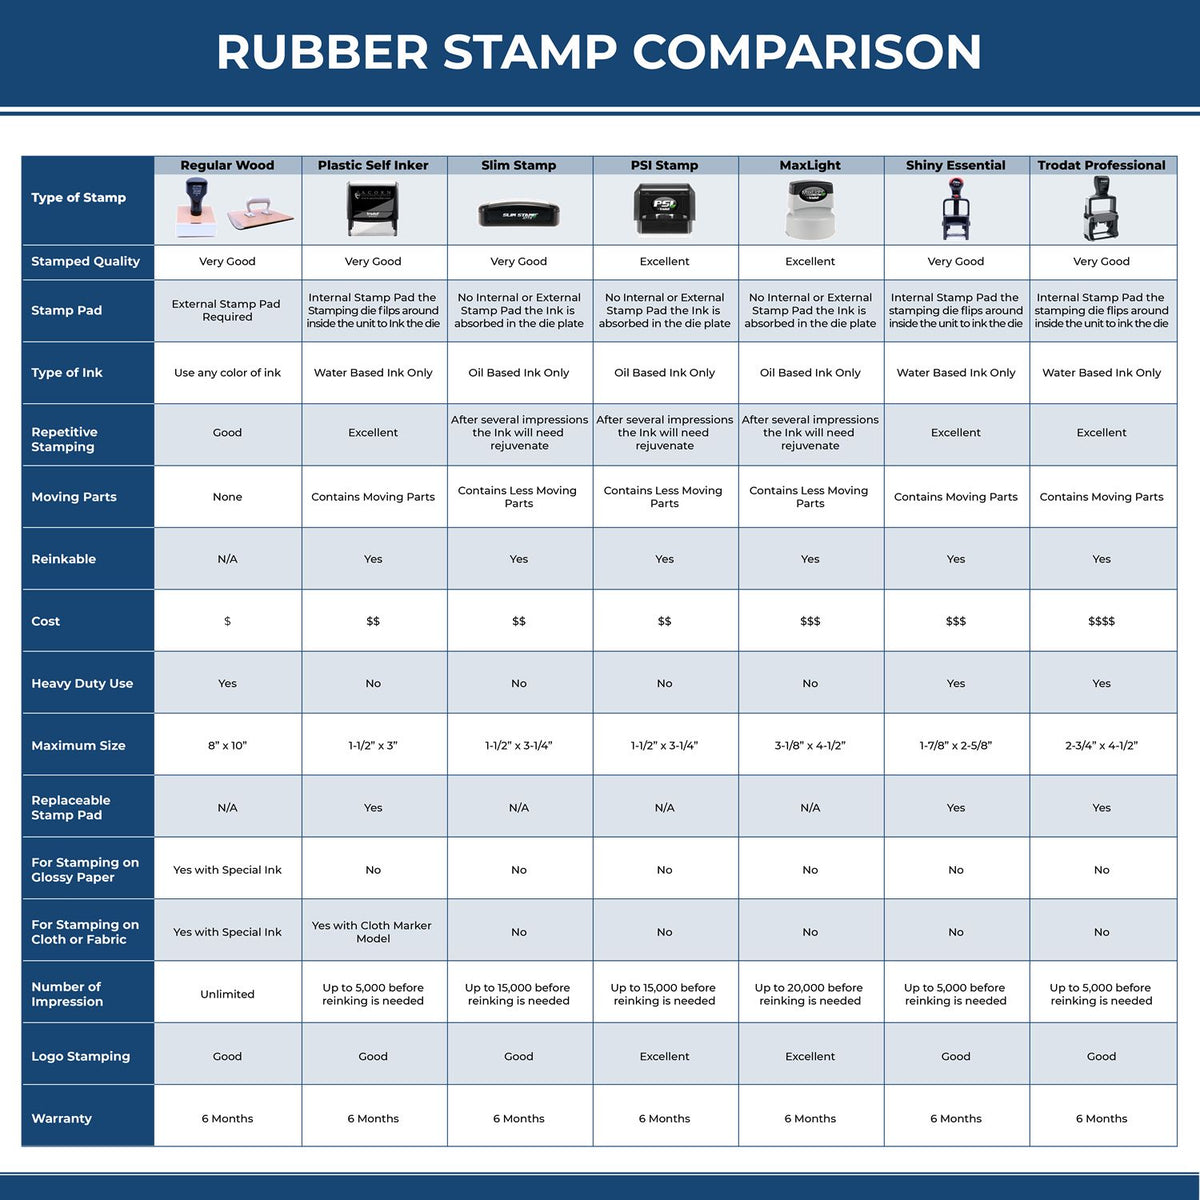 Large Lower Case First Class Rubber Stamp 4864R Rubber Stamp Comparison